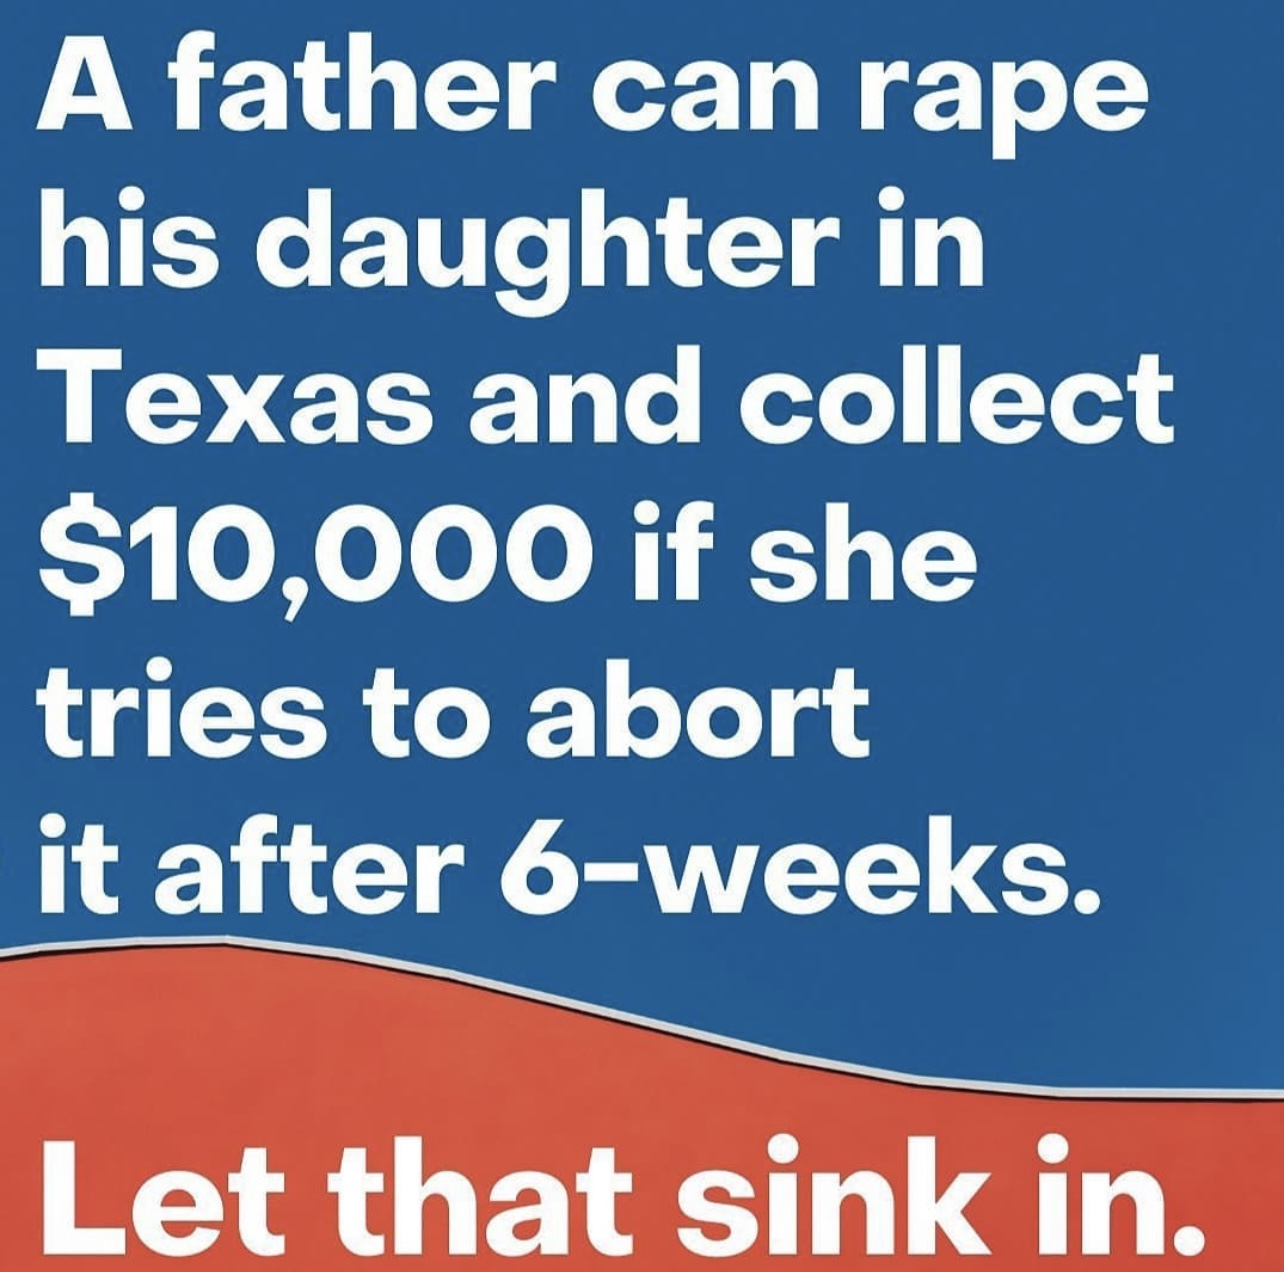 A blue and red info-picture with white text 'A father can rape his daughter in Texas and collect $10,000 if she tries to abort it after 6-weeks. Let that sink in.' 